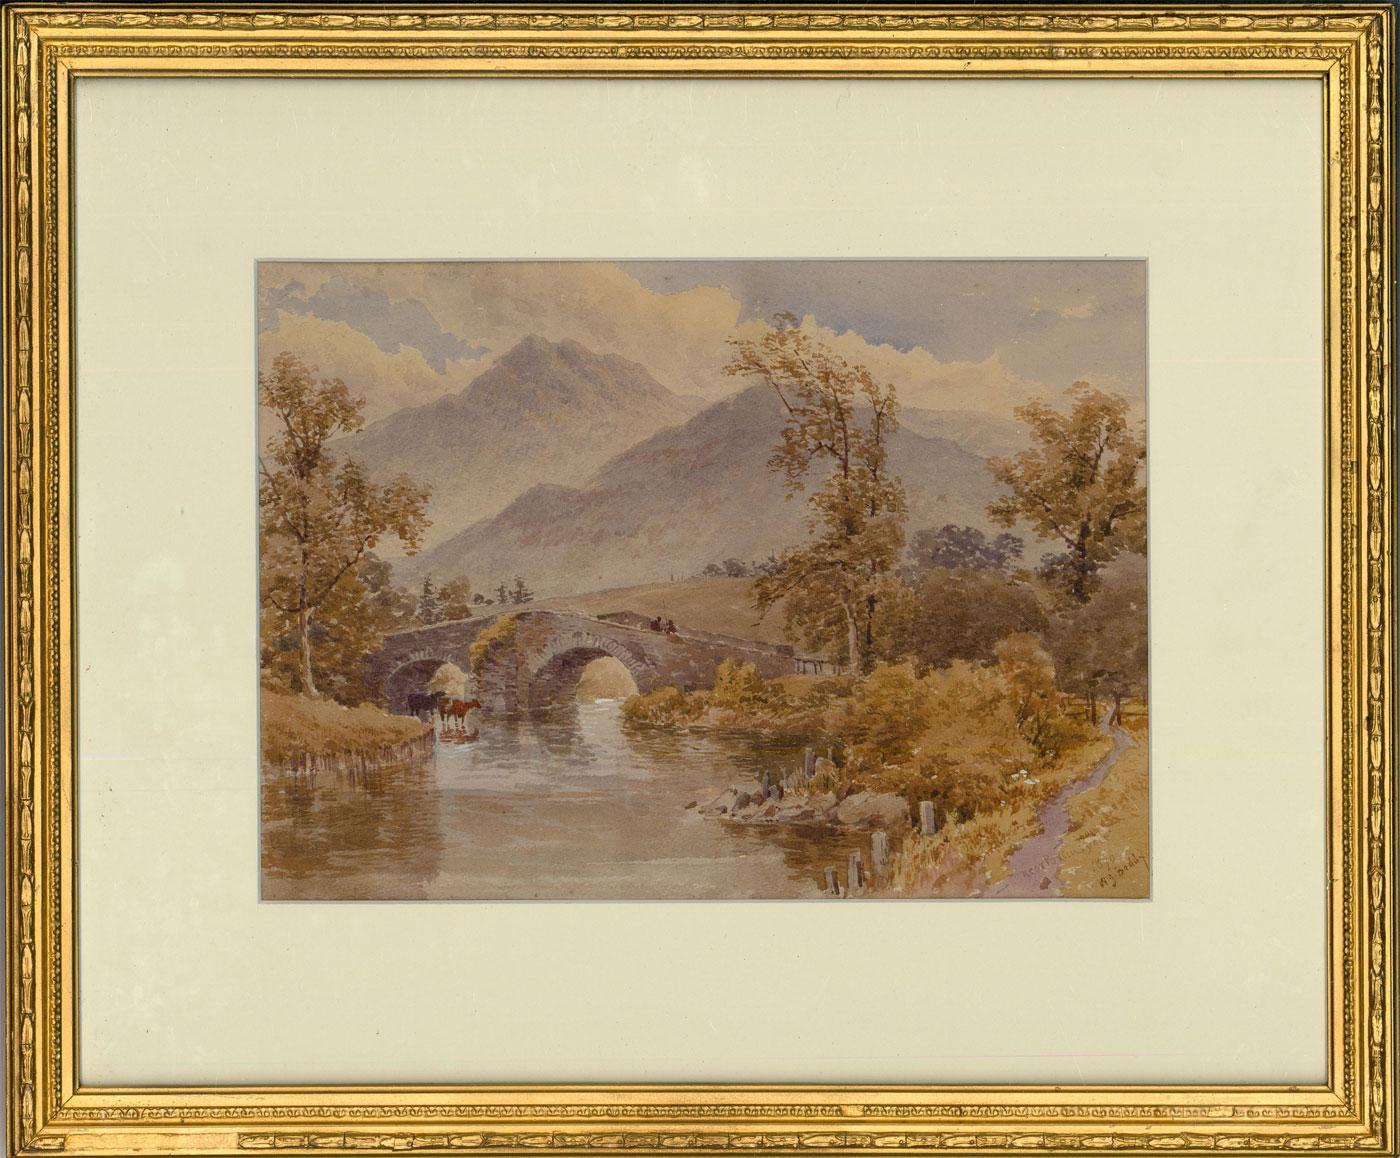 Close to the western shore of Derwentwater, this delightful watercolour depicts a village bridge from Portinscale. Framed in one of the stone arches, watering cattle have there heads raised to two fishing enthusiasts standing on the bridge. In the